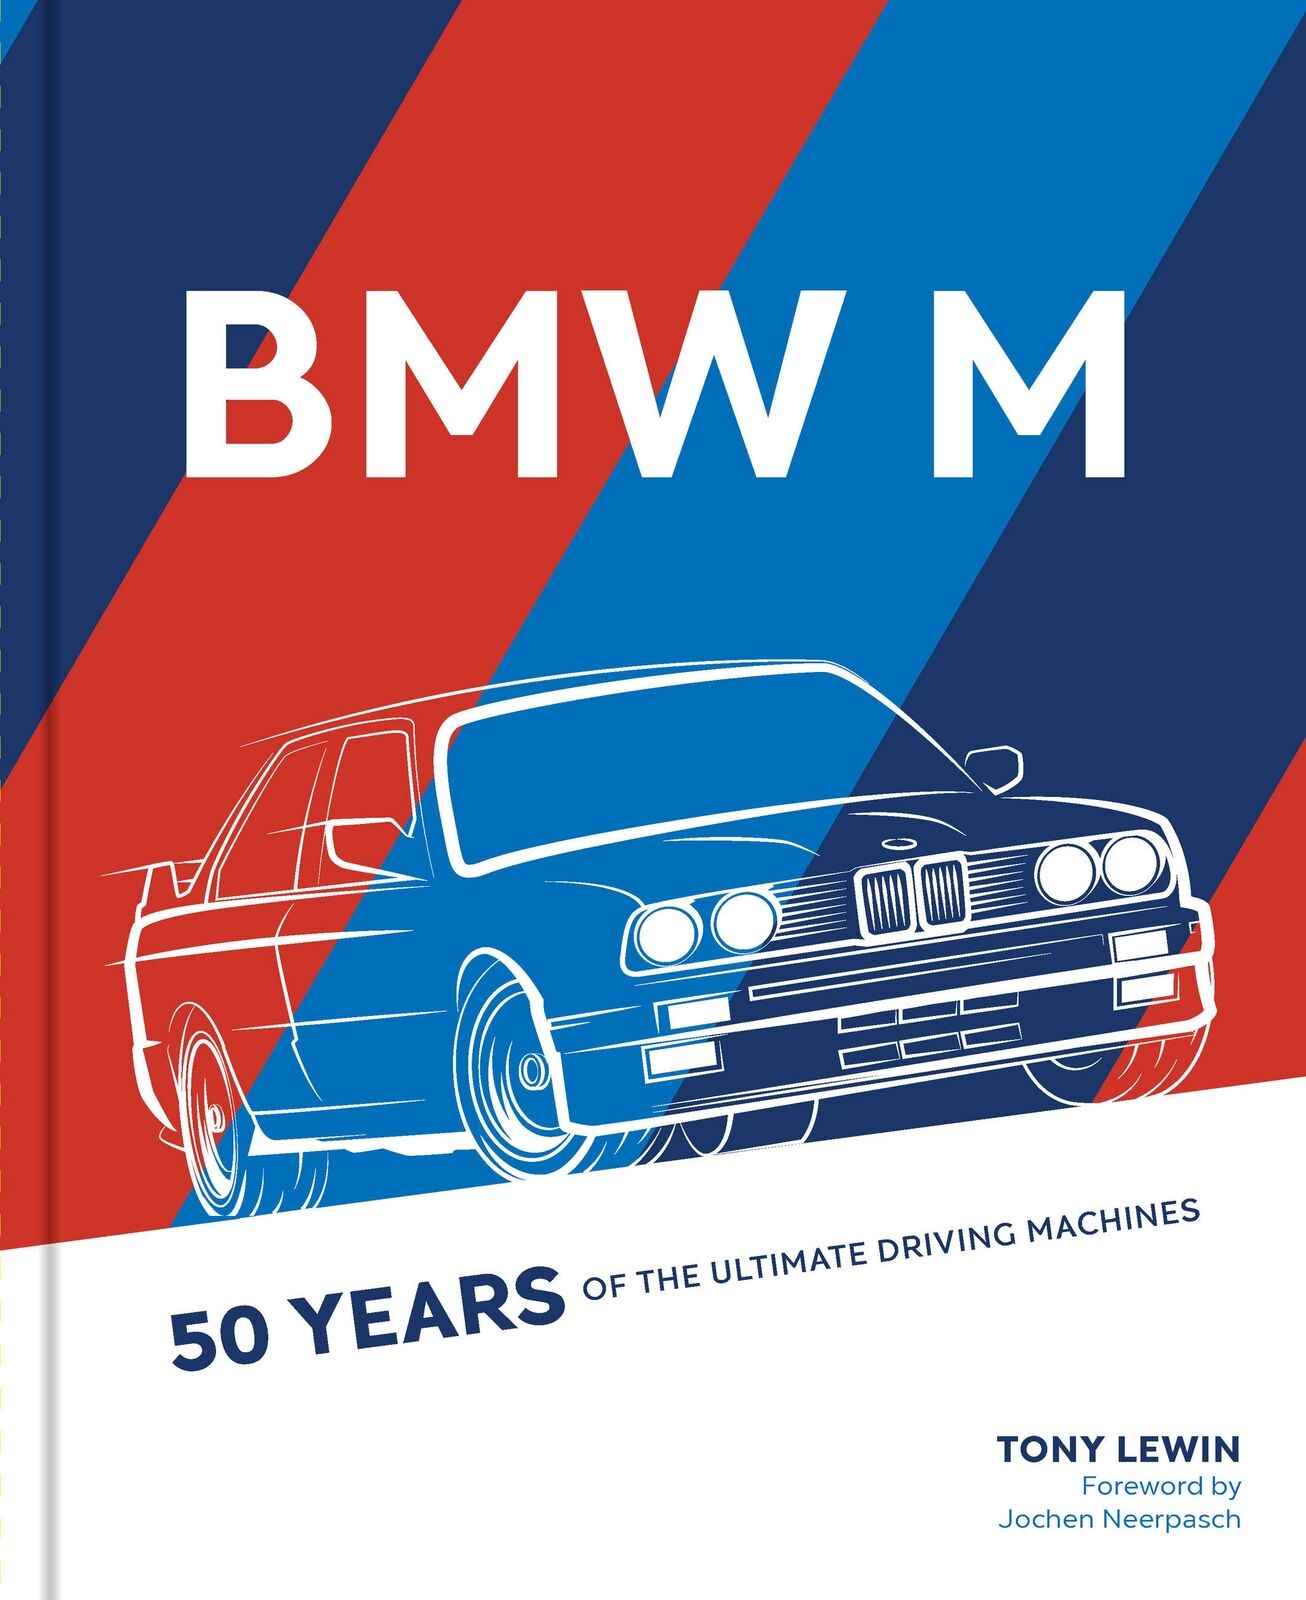 BMW M M2 M3 M4 M5 M8 50 Years of the Ultimate Driving Machines book